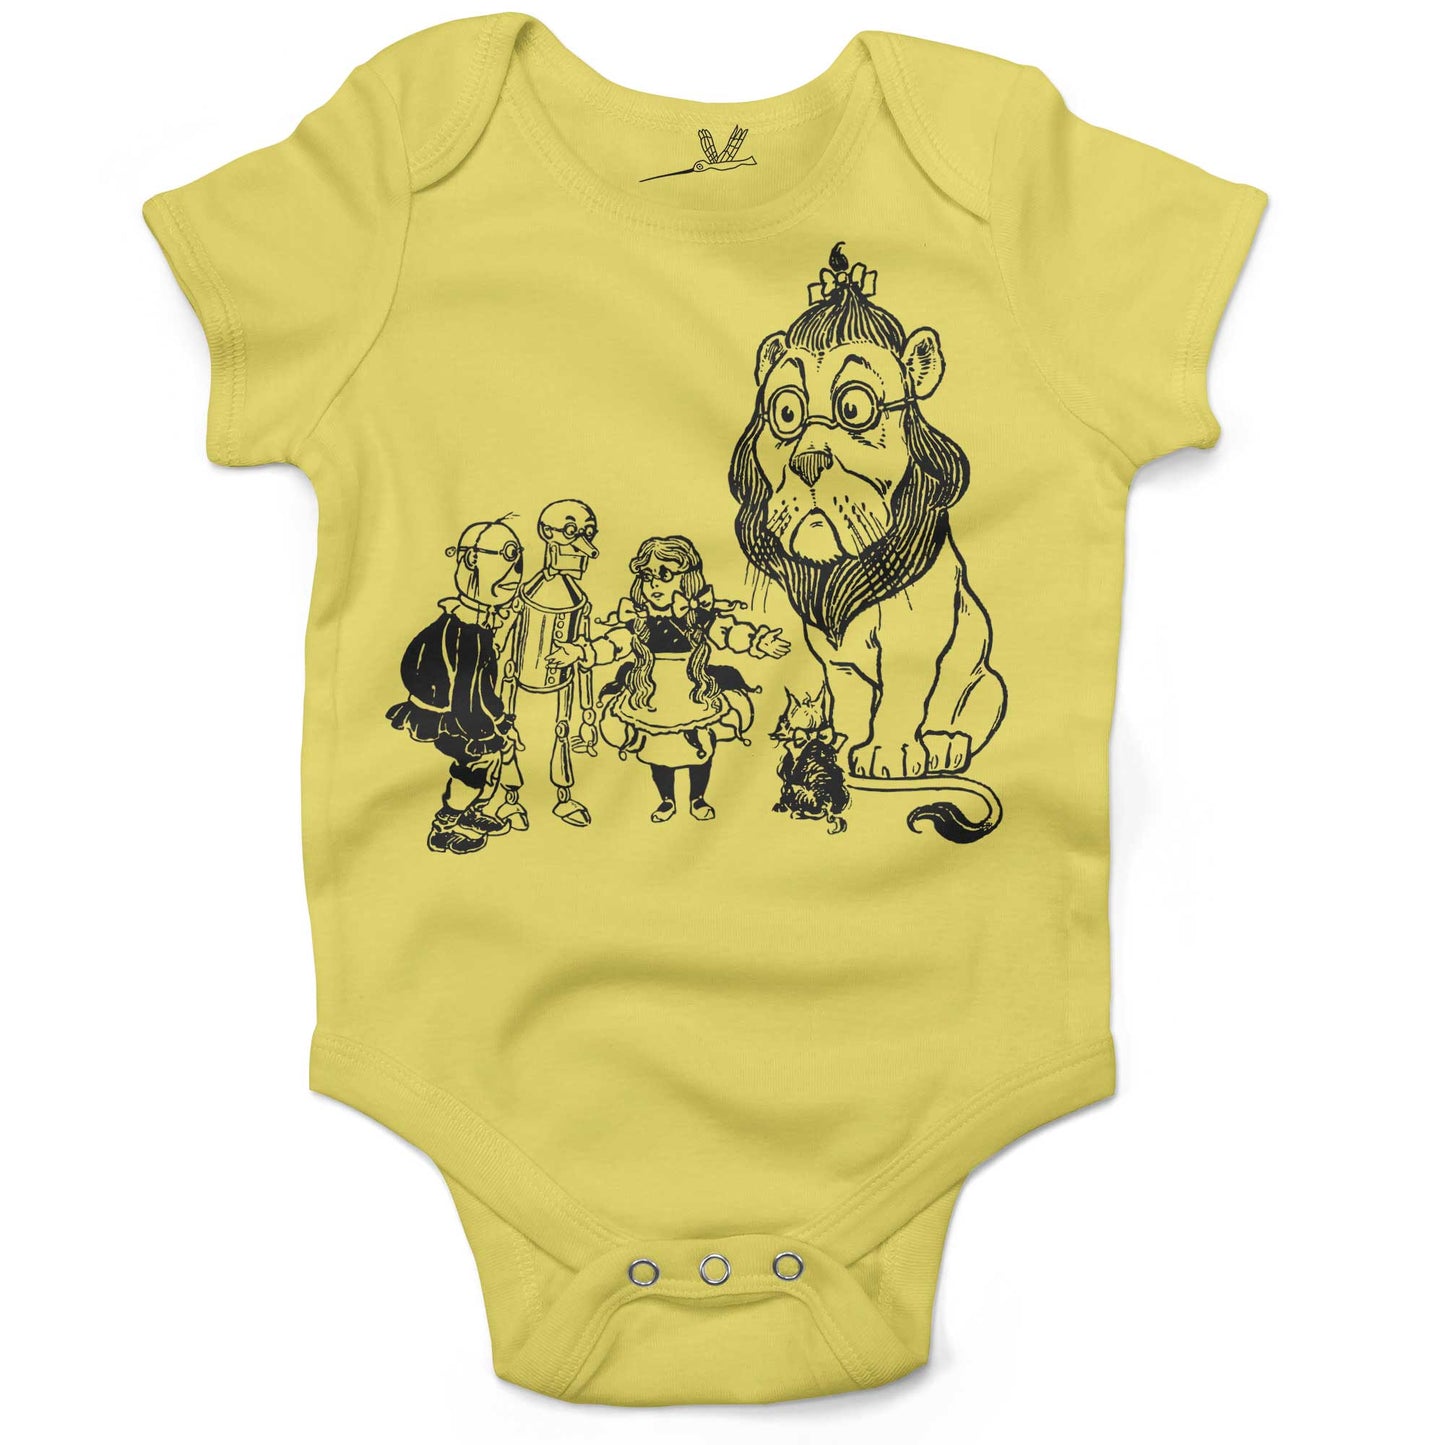 Wizard Of Oz Infant Bodysuit-Yellow-3-6 months